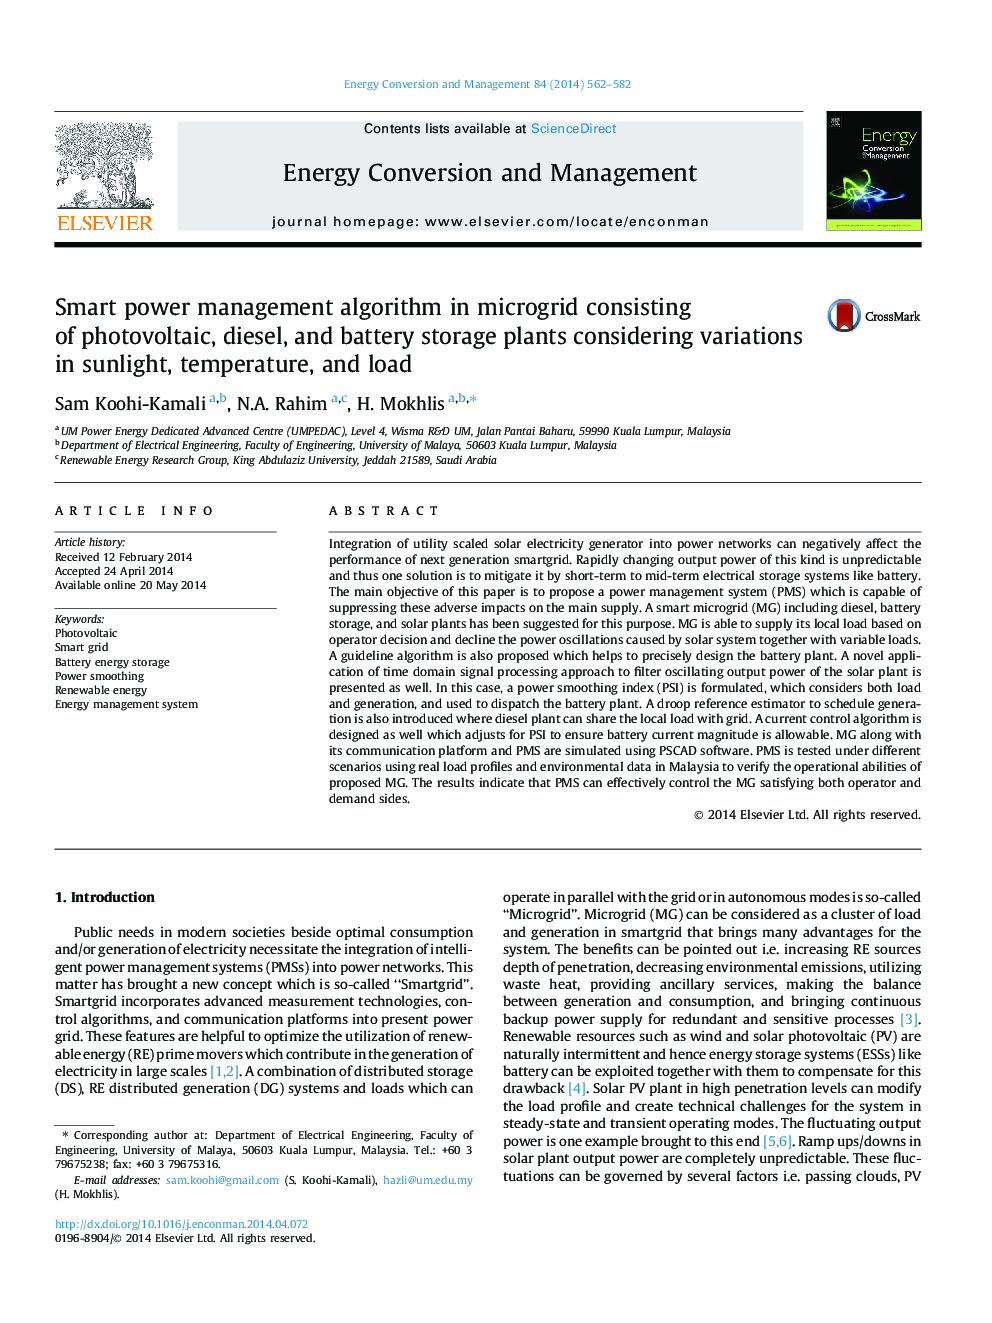 Smart power management algorithm in microgrid consisting of photovoltaic, diesel, and battery storage plants considering variations in sunlight, temperature, and load